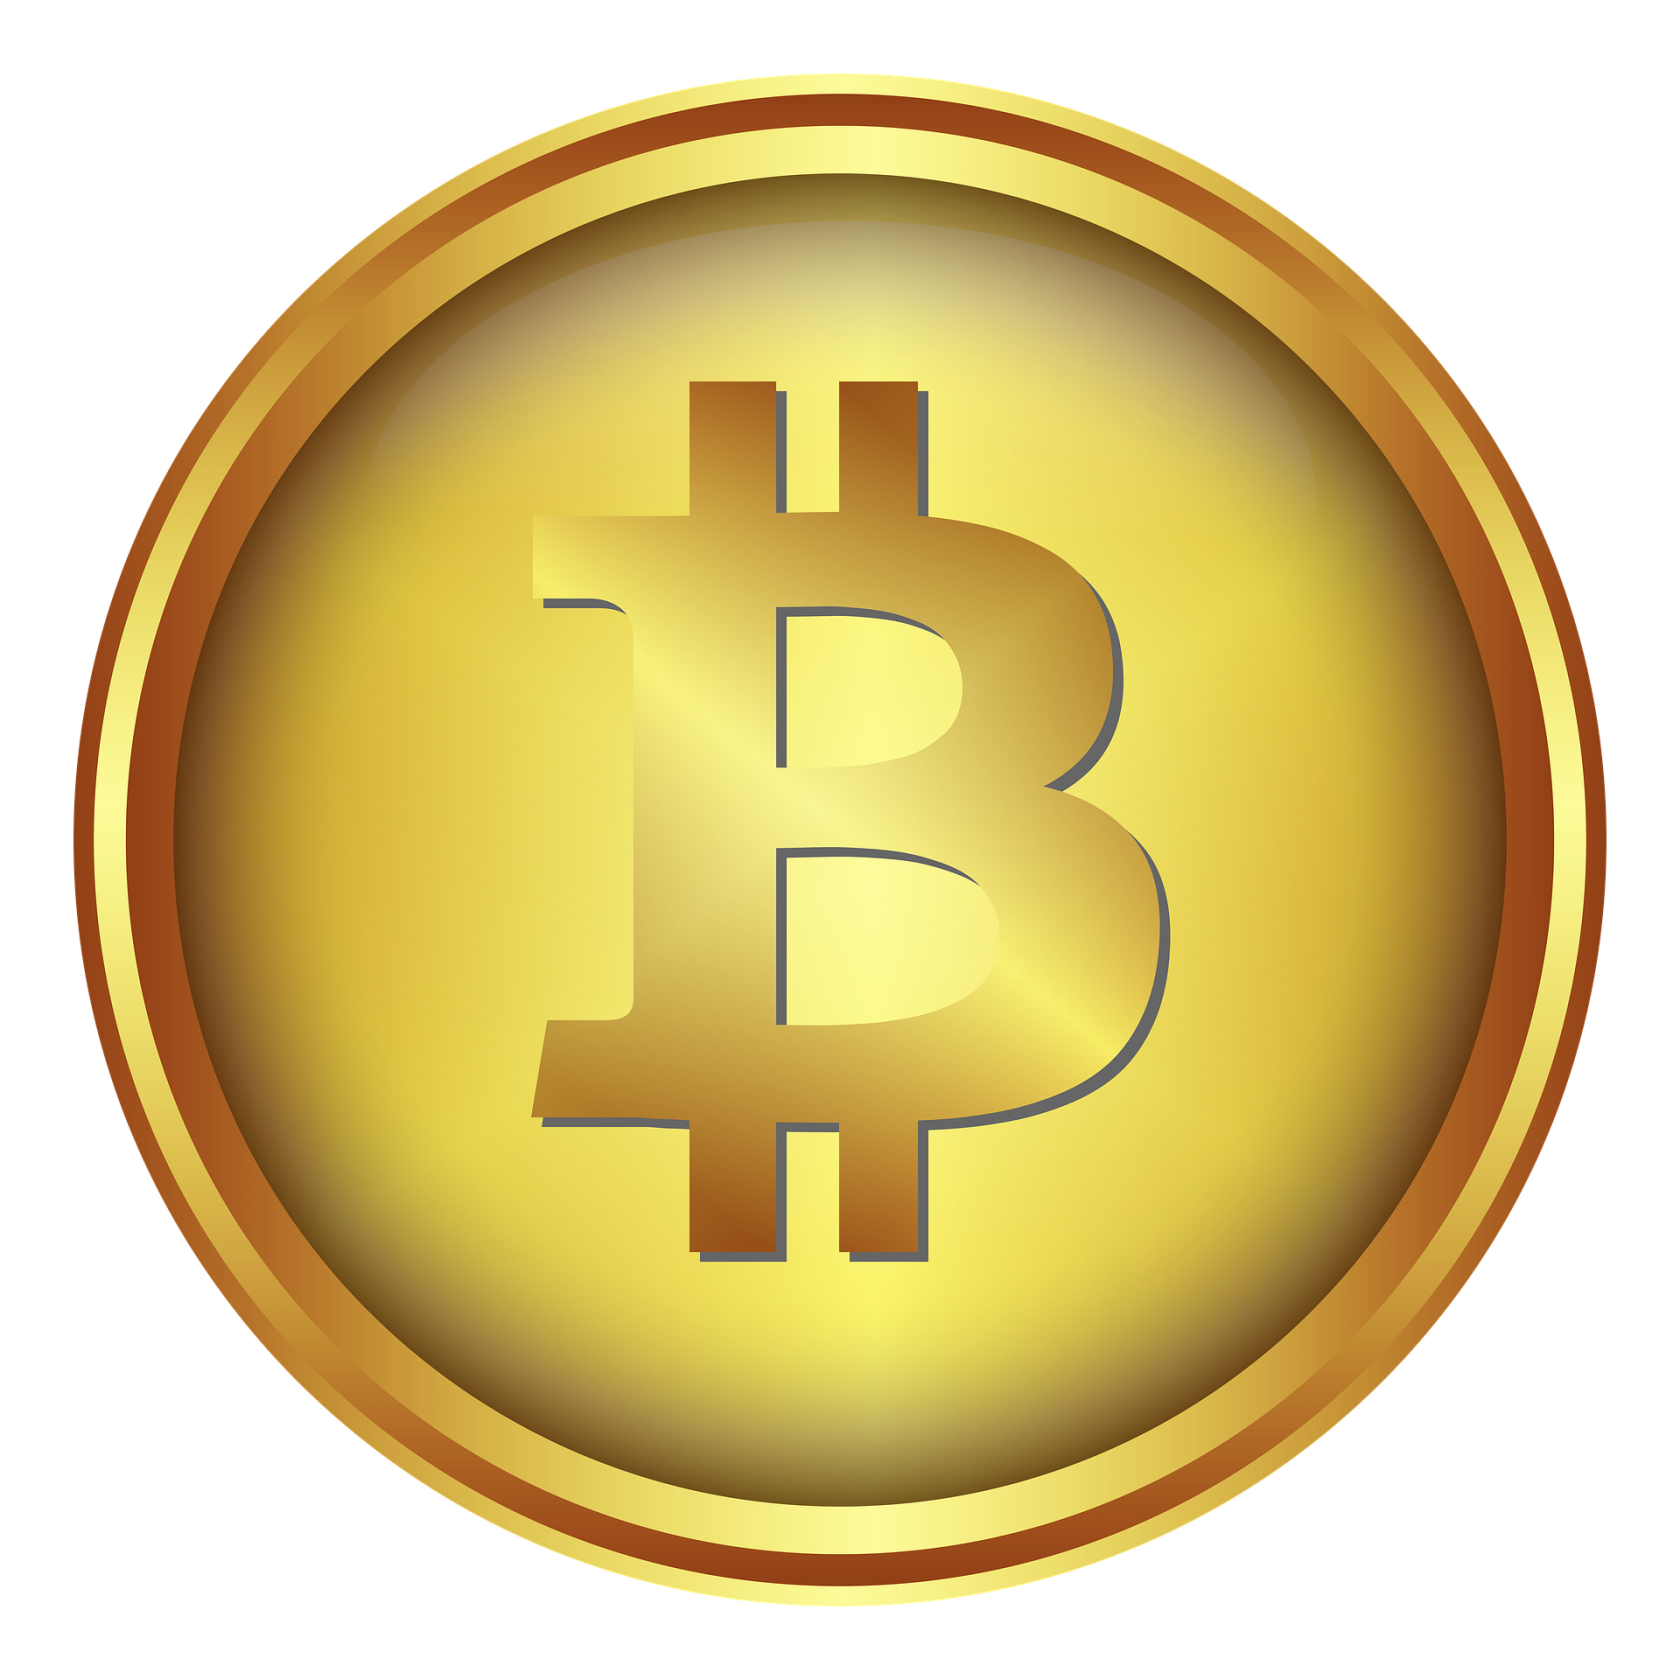 Gold Exchange Blockchain Bitcoin Cryptocurrency Lakshmi Coin PNG Image